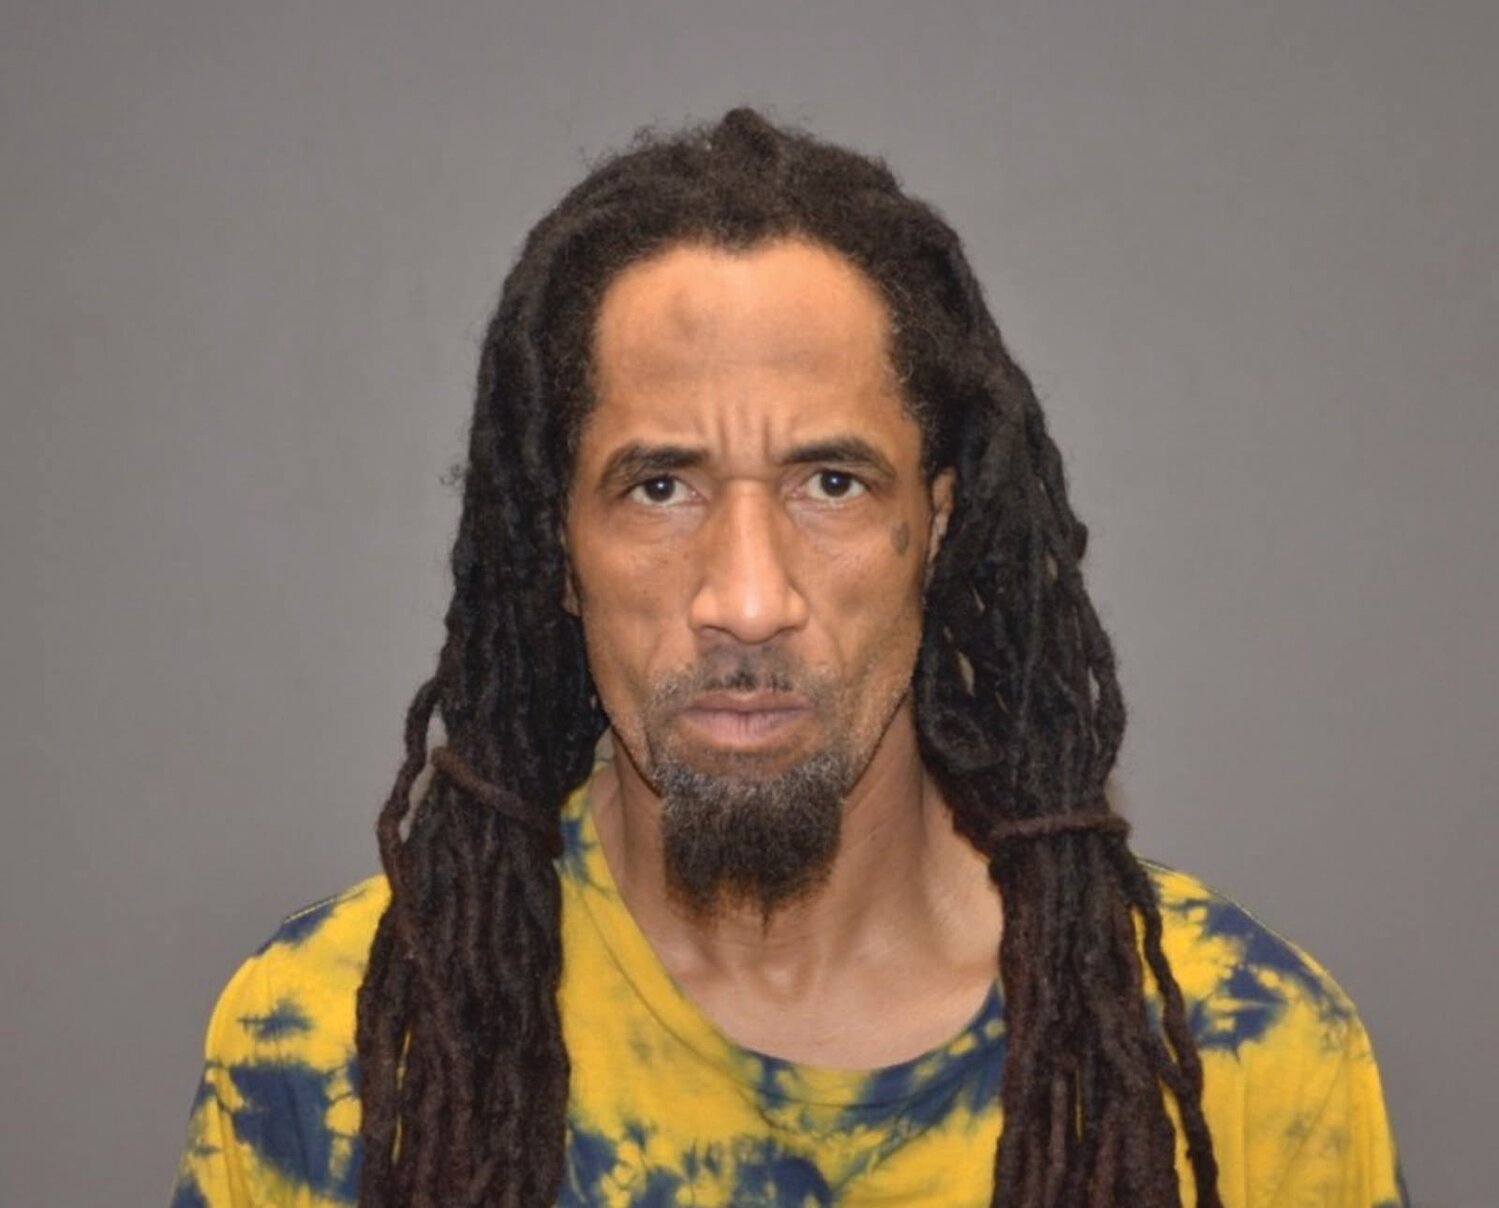 BEHIND BARS: Police have arrested and charged Ramon Abreu, 44, of Whittier Avenue, Providence, with a long list of charges following a shooting last week at City Limit Auto Sales on Hartford Avenue.